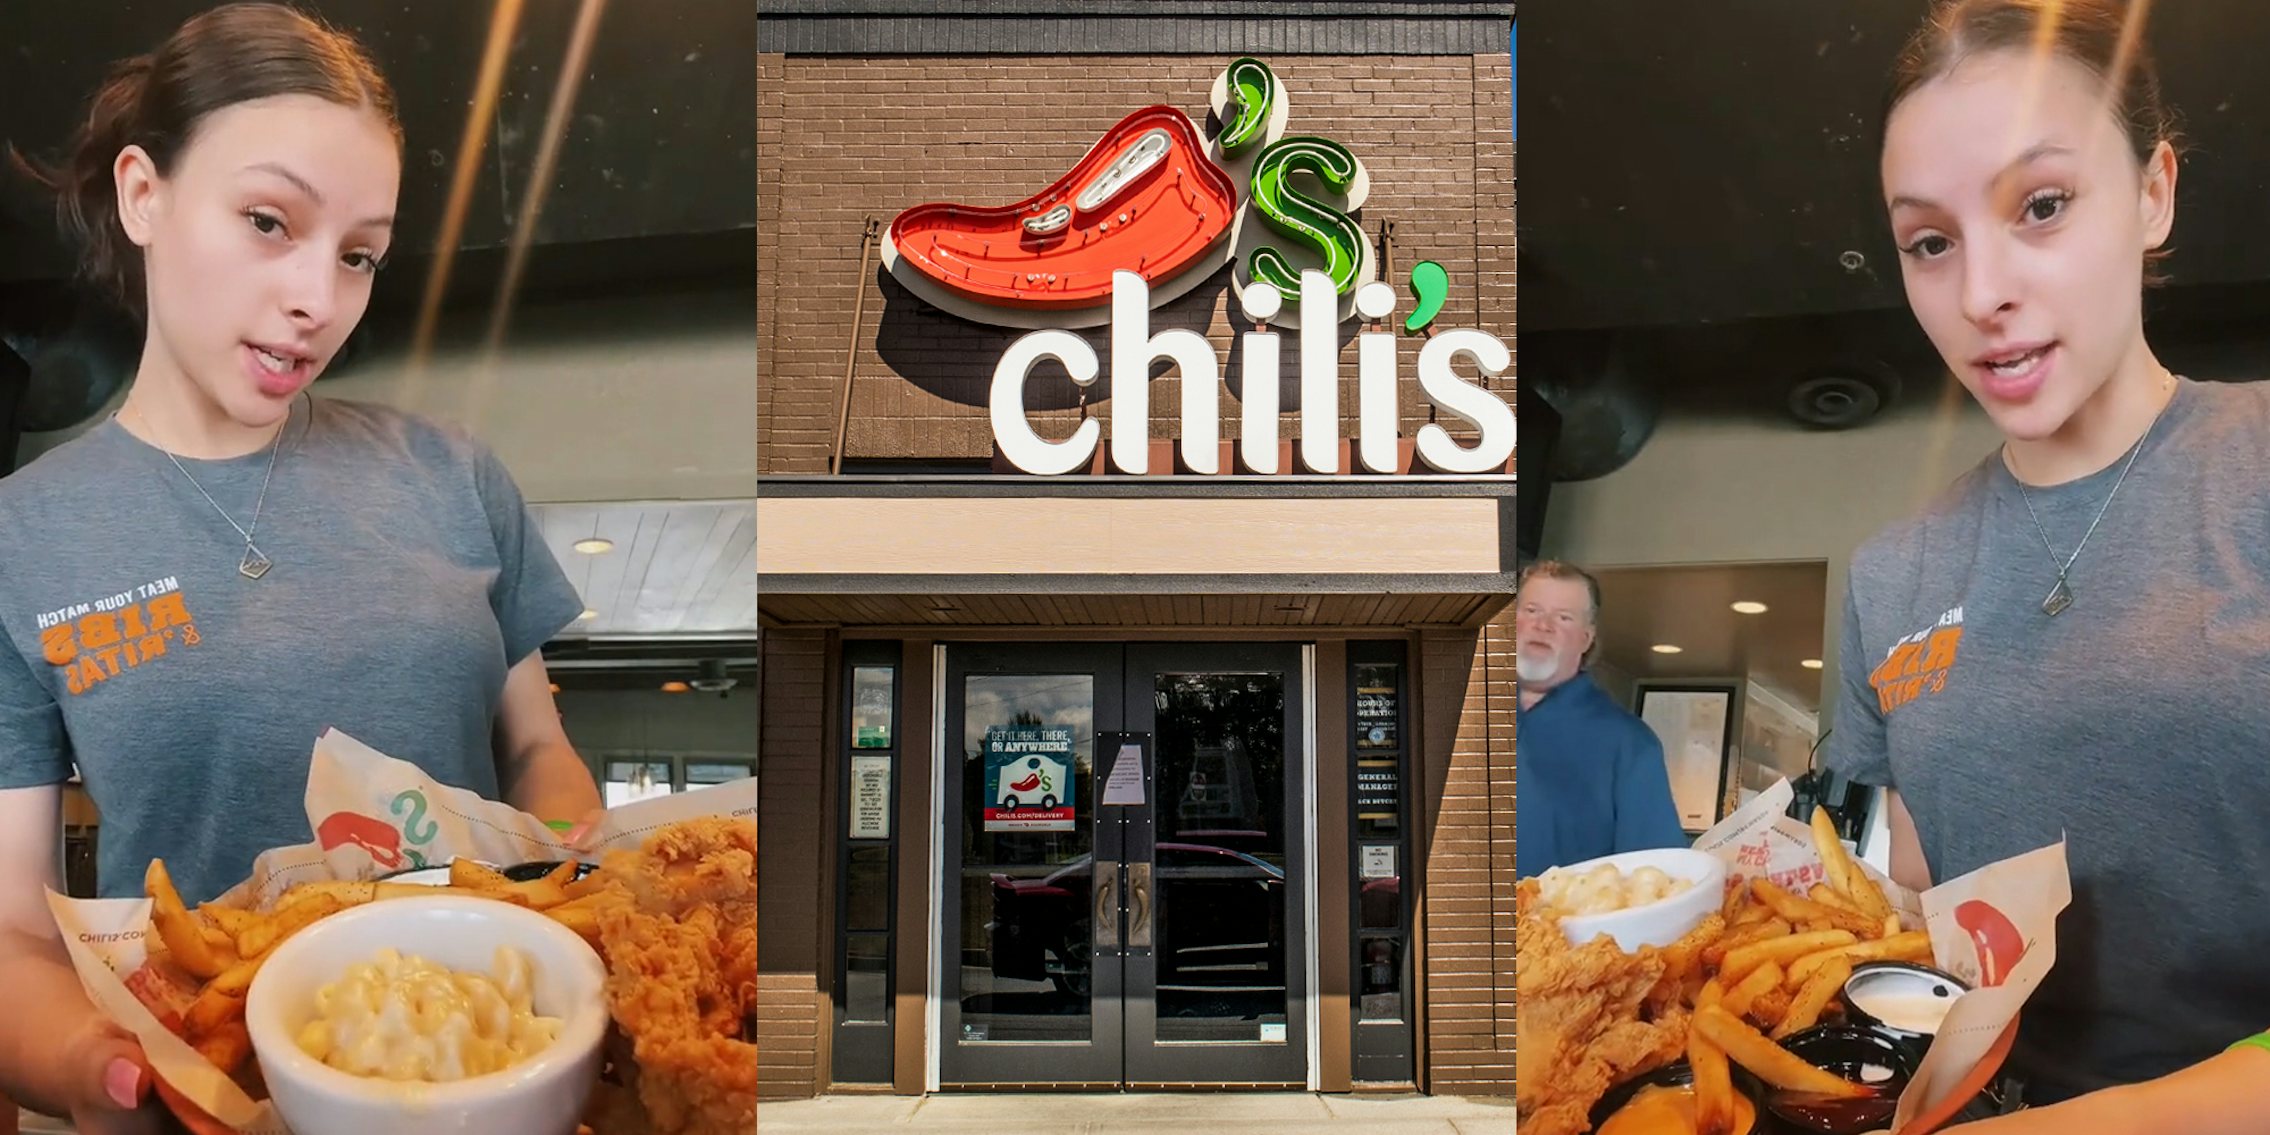 Chili's worker showing new mac n cheese meal (l) Chilis sign above entrance (c) Chili's worker showing new mac n cheese meal (r)